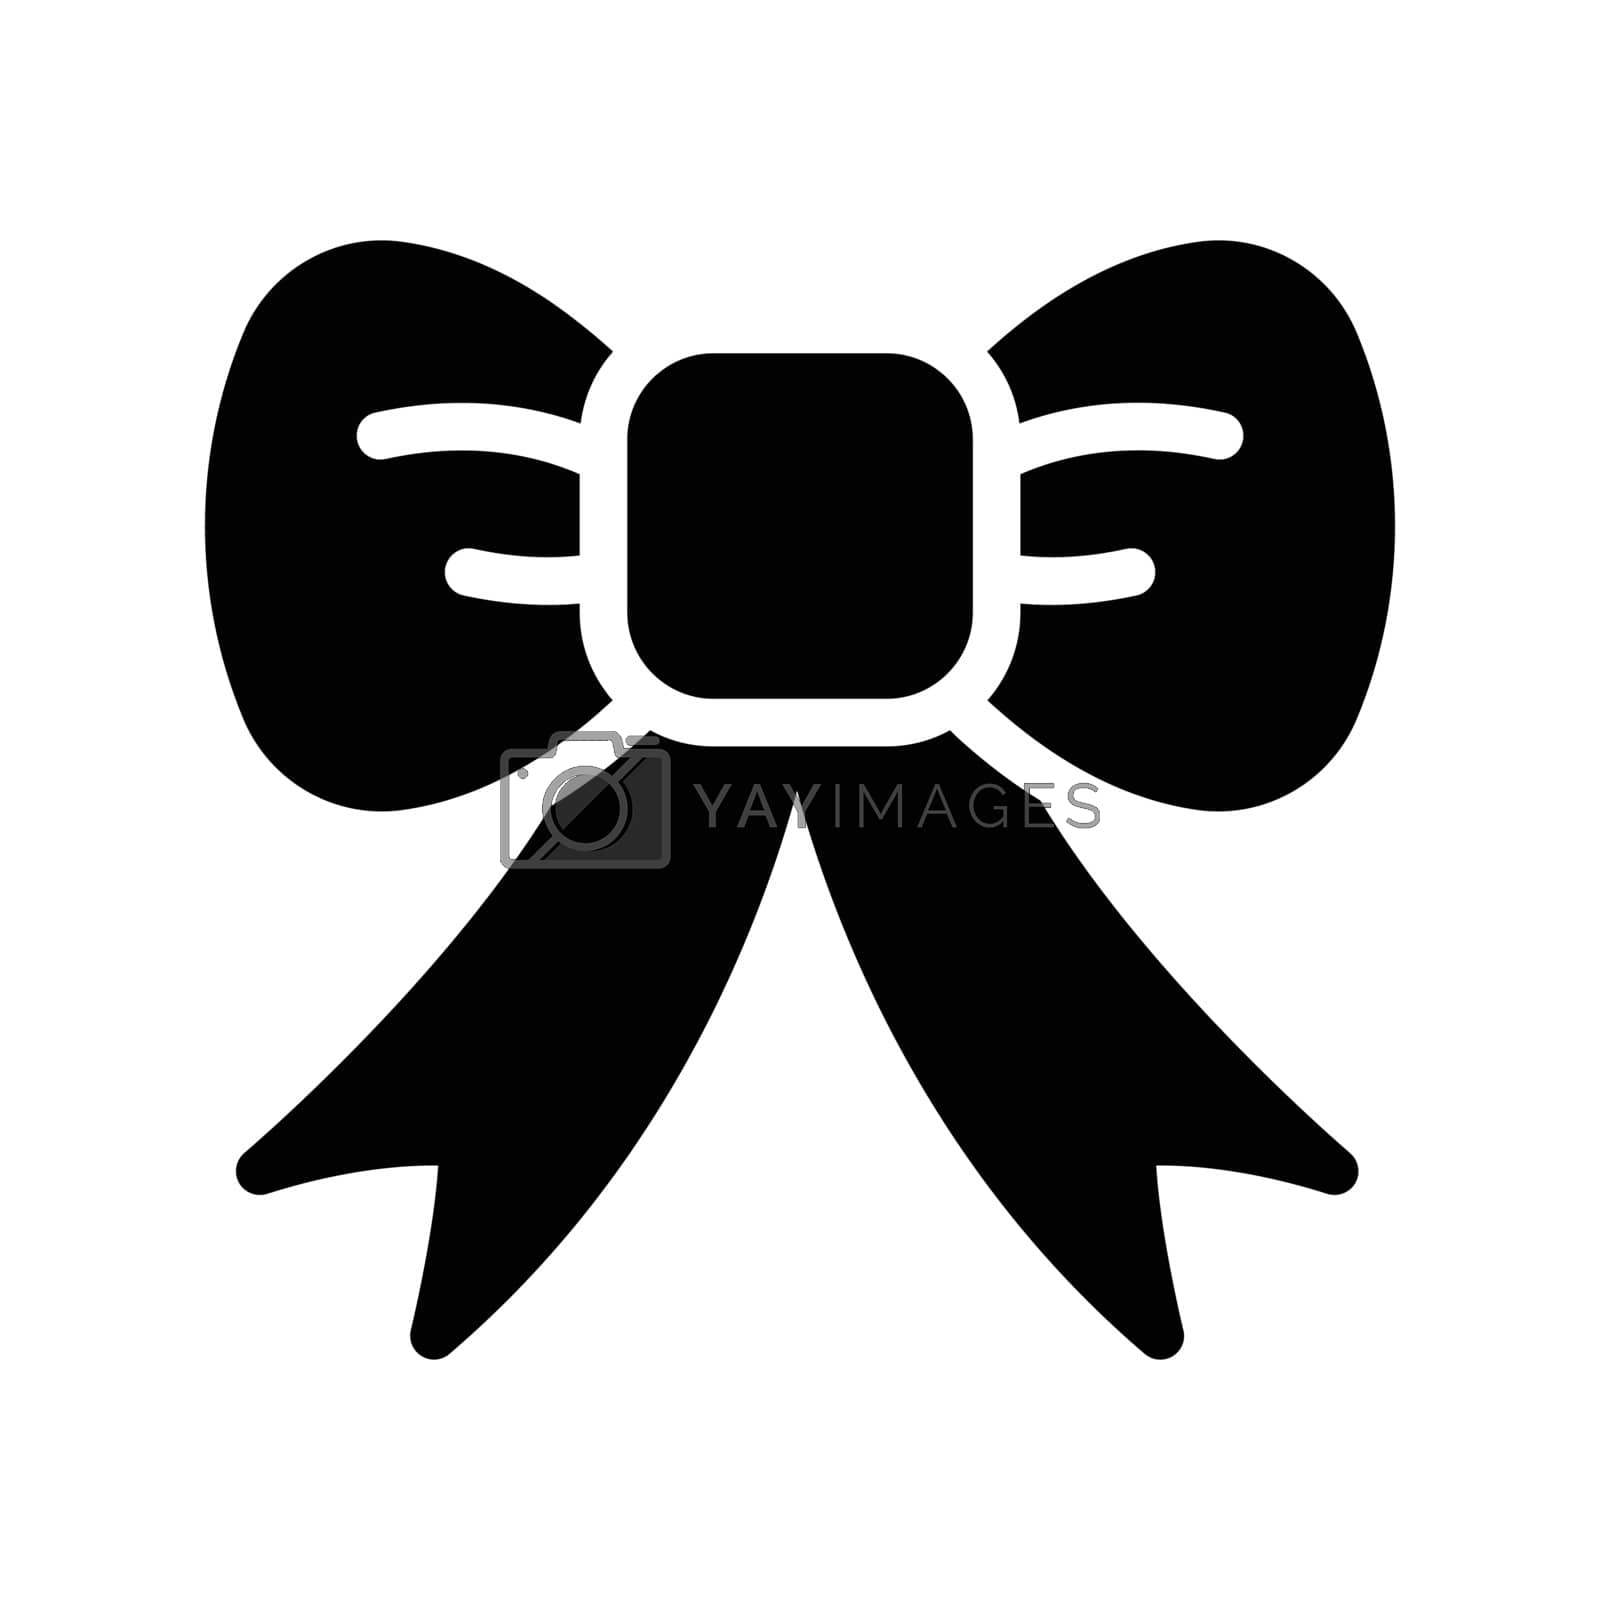 Royalty free image of tie by vectorstall